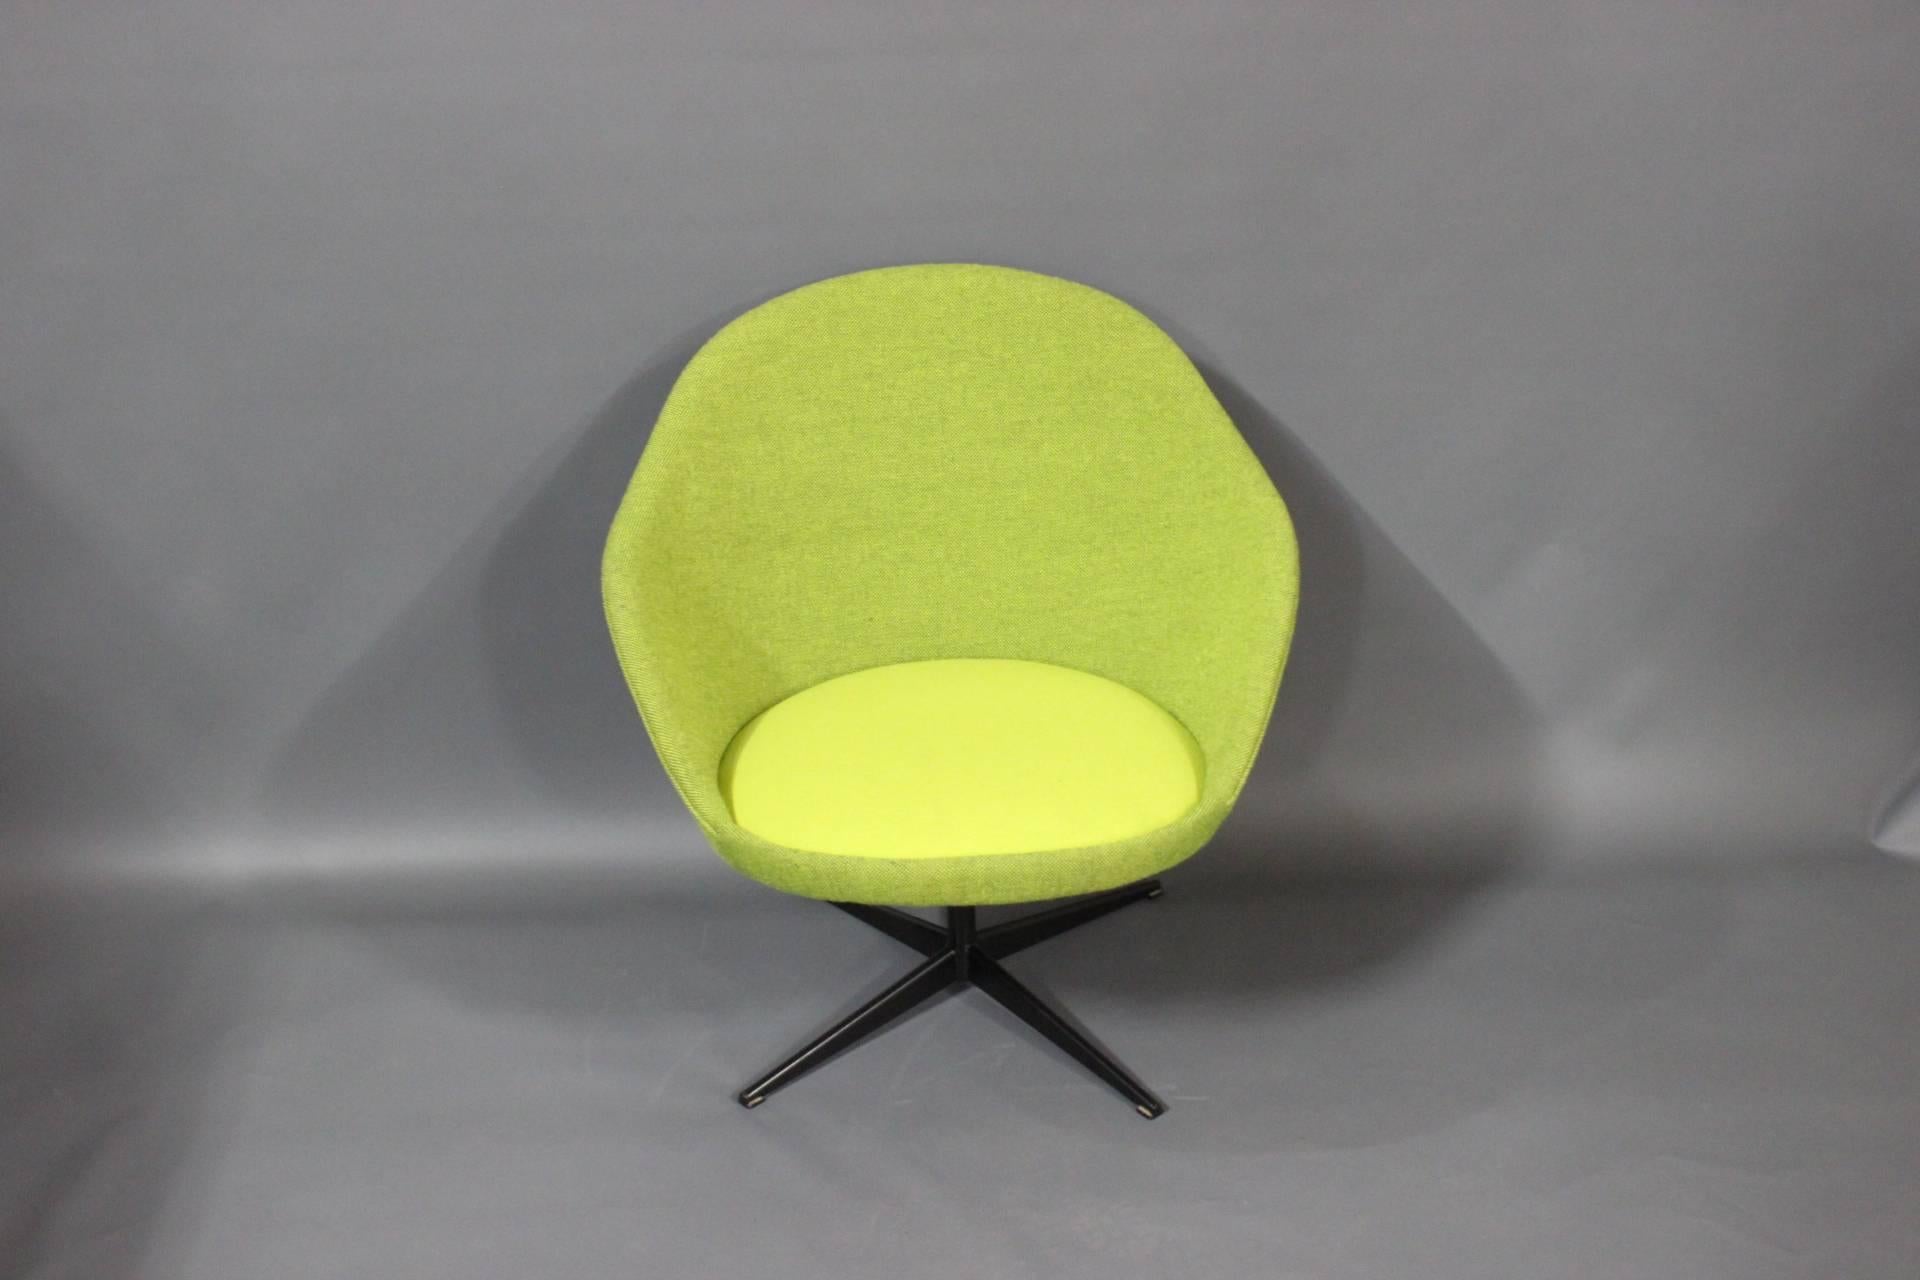 Discover the comfort and charm of this retro armchair from the 1960s. Upholstered in beautiful green Hallingdal wool, it not only adds a colorful touch to your decor, but also provides a luxurious and comfortable sitting experience. With its slim